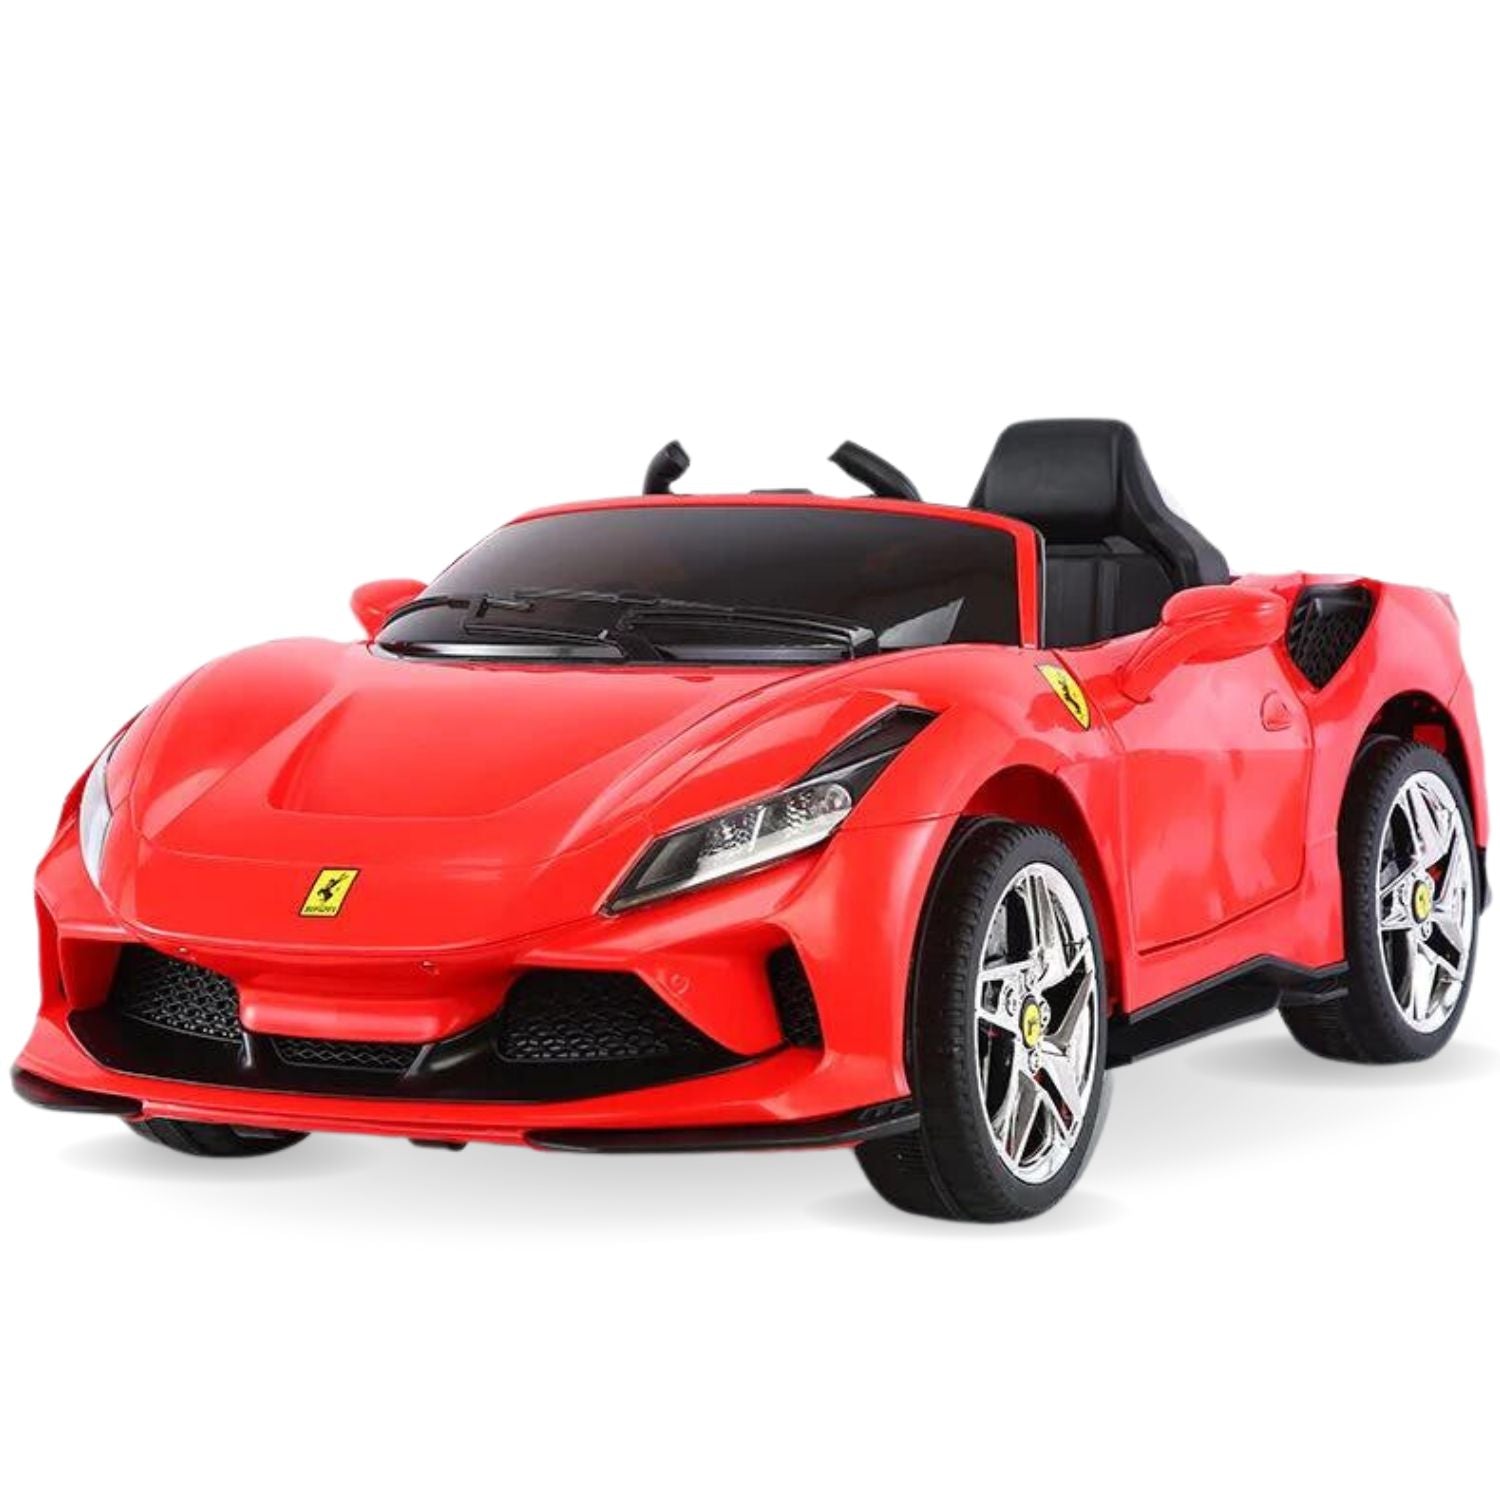 Baby Moo Ferrari F8 12V Battery Operated Ride On Car for Kids | Remote Control | Rechargeable Battery | USB MP3 Player | Ages 2-8 - Red - Baby Moo